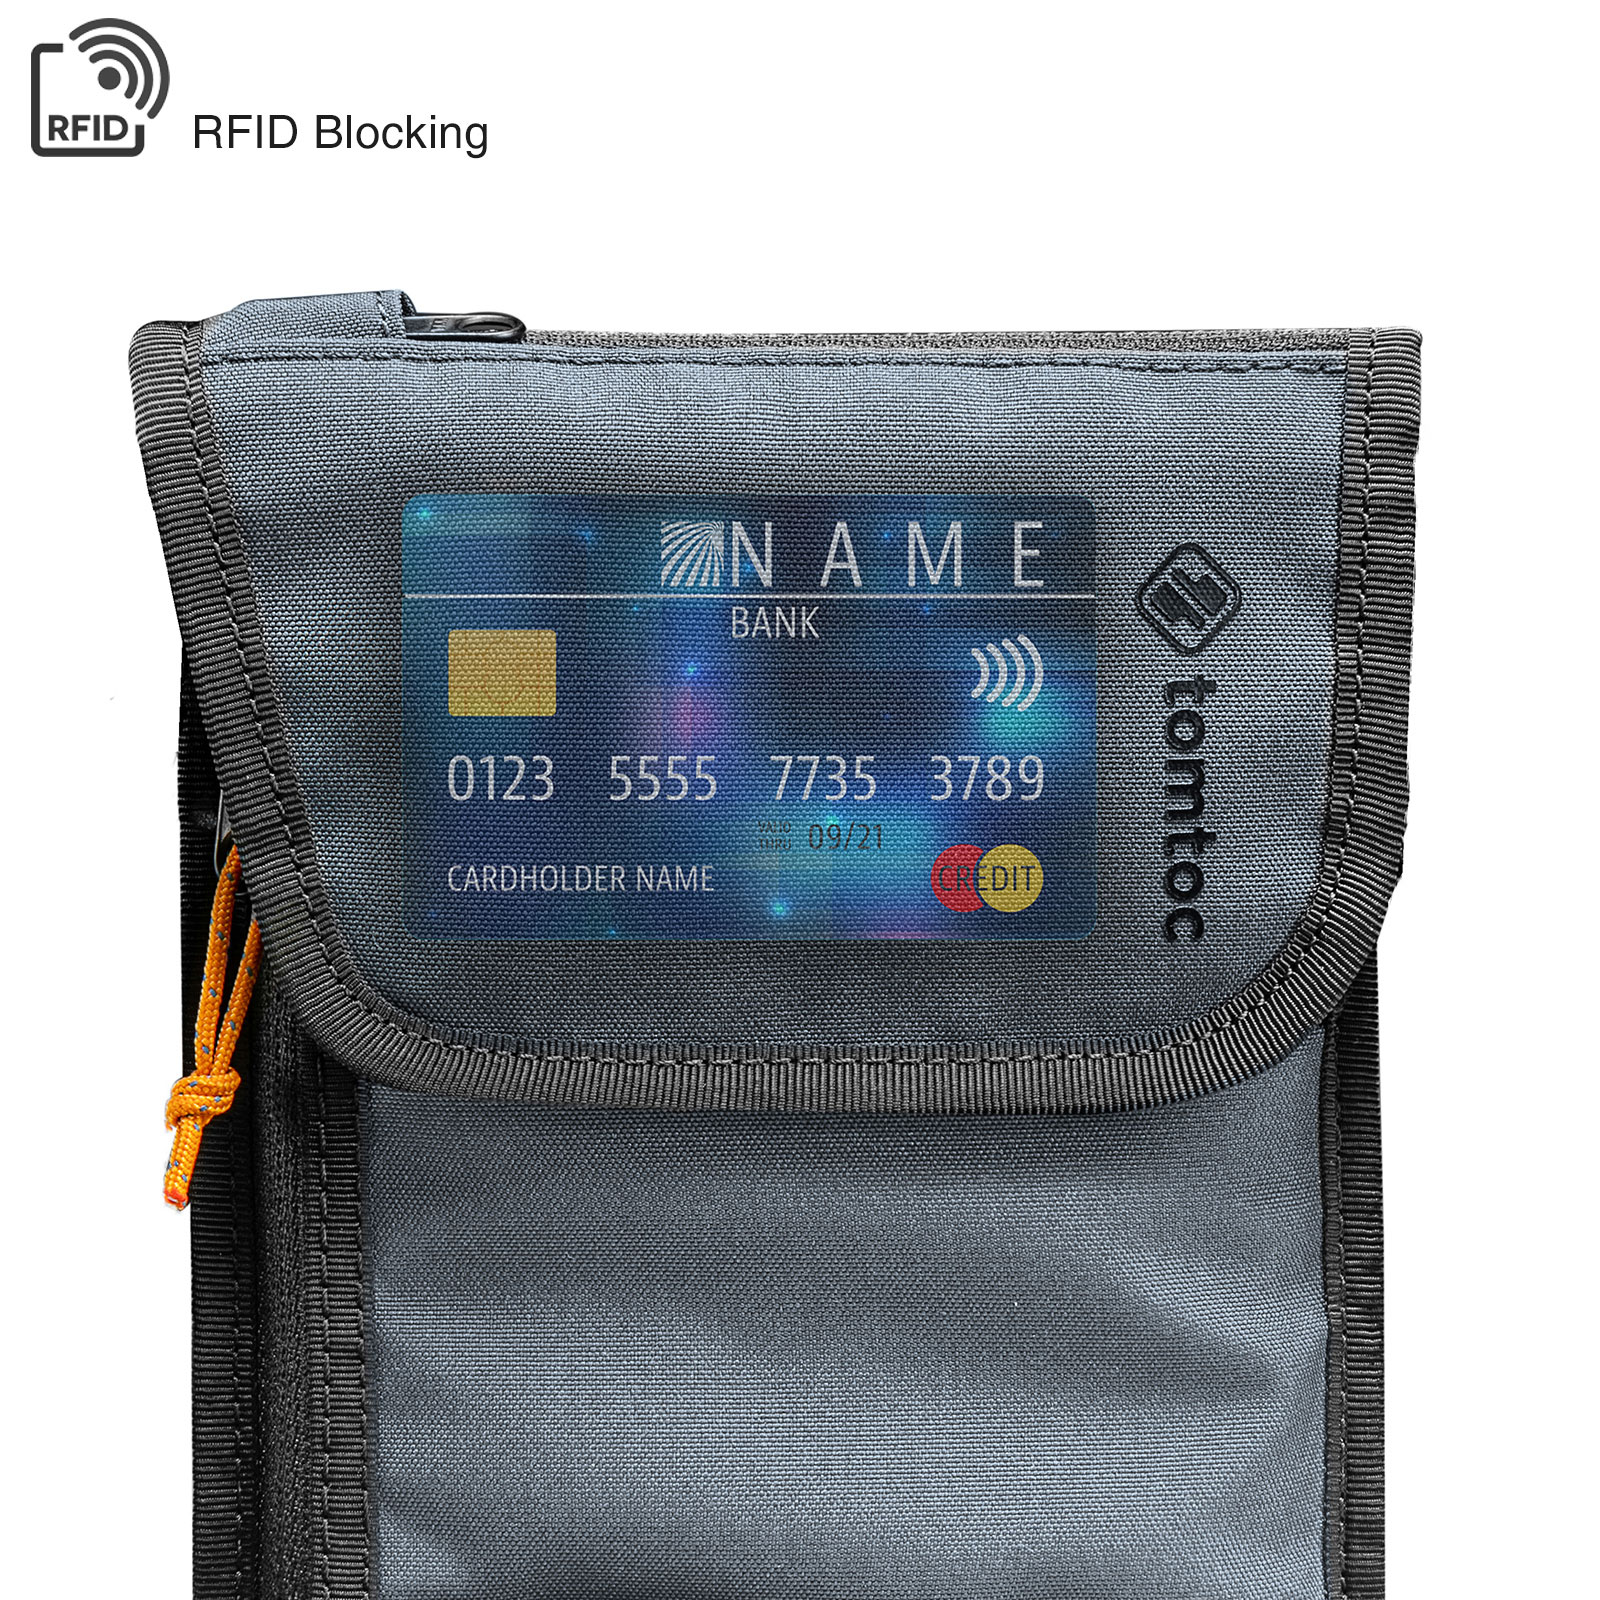 Phone Safe and Organized Cash Credit Cards RFID Blocking Stash Neck Travel Pouch to Keep your Passport tomtoc Travel Neck Wallet Passport Holder with a Sim Card Holder and Eject Pin